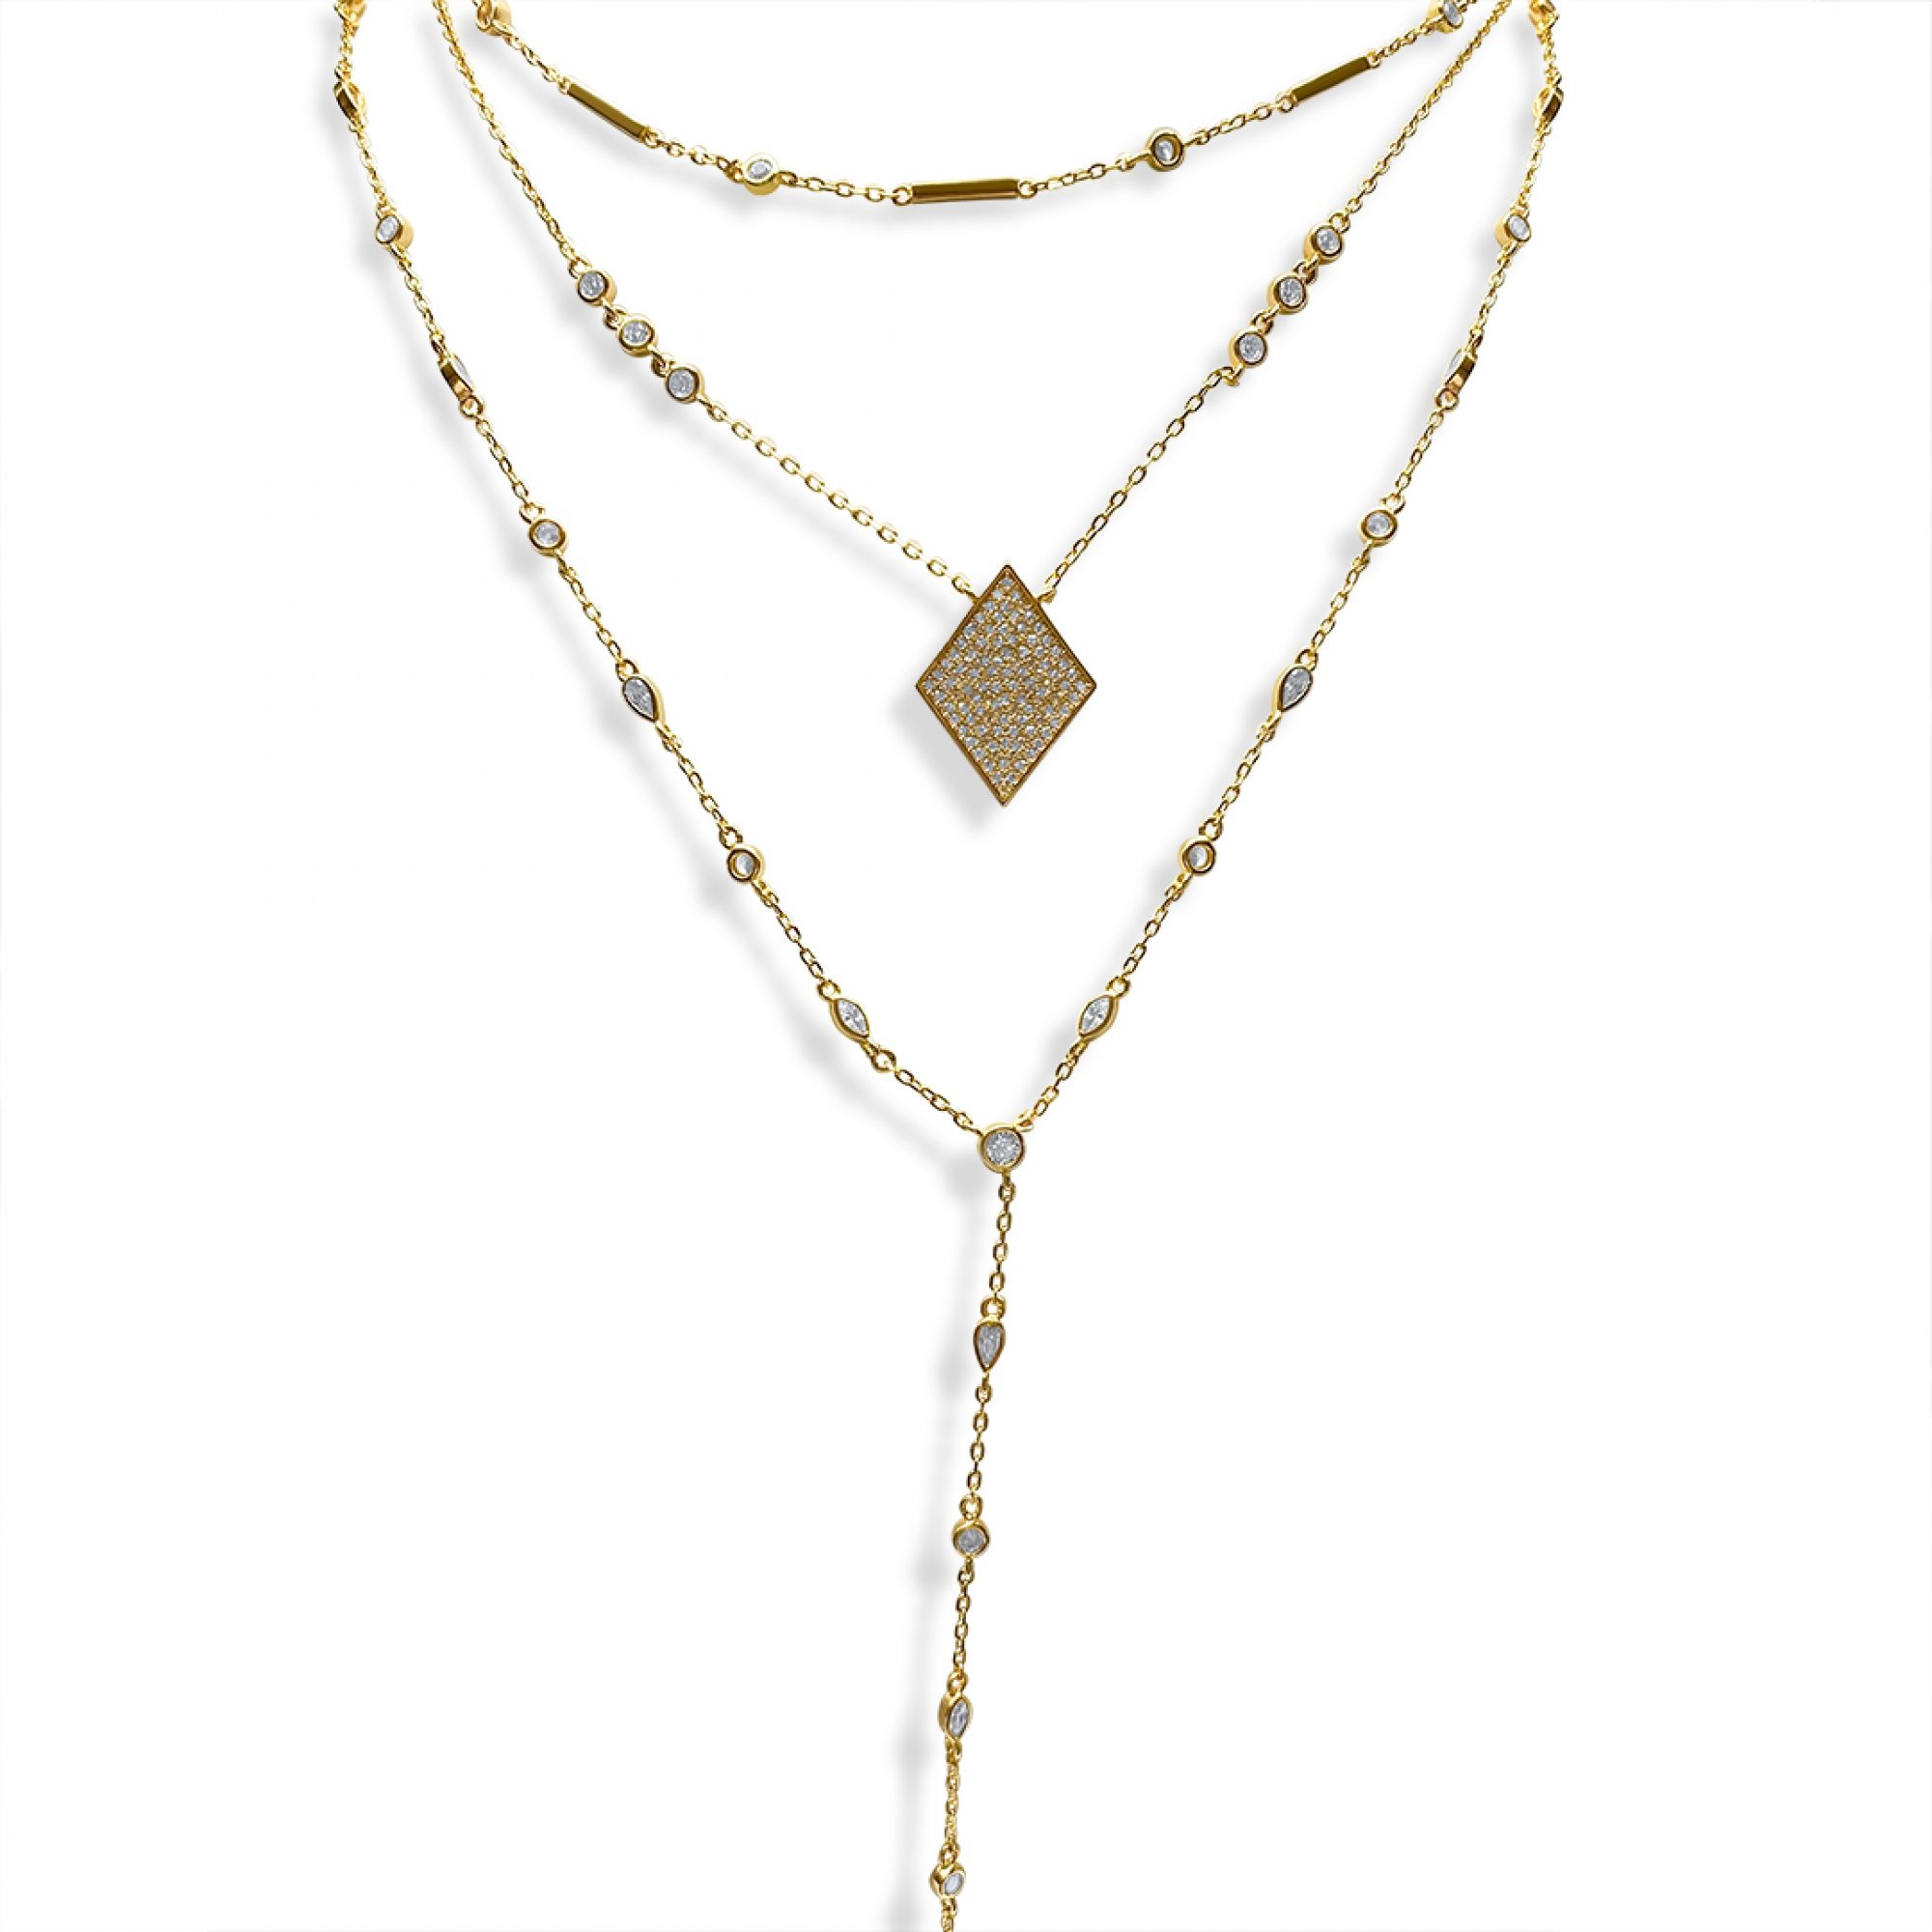 Gold plated triple necklace with zircon stones